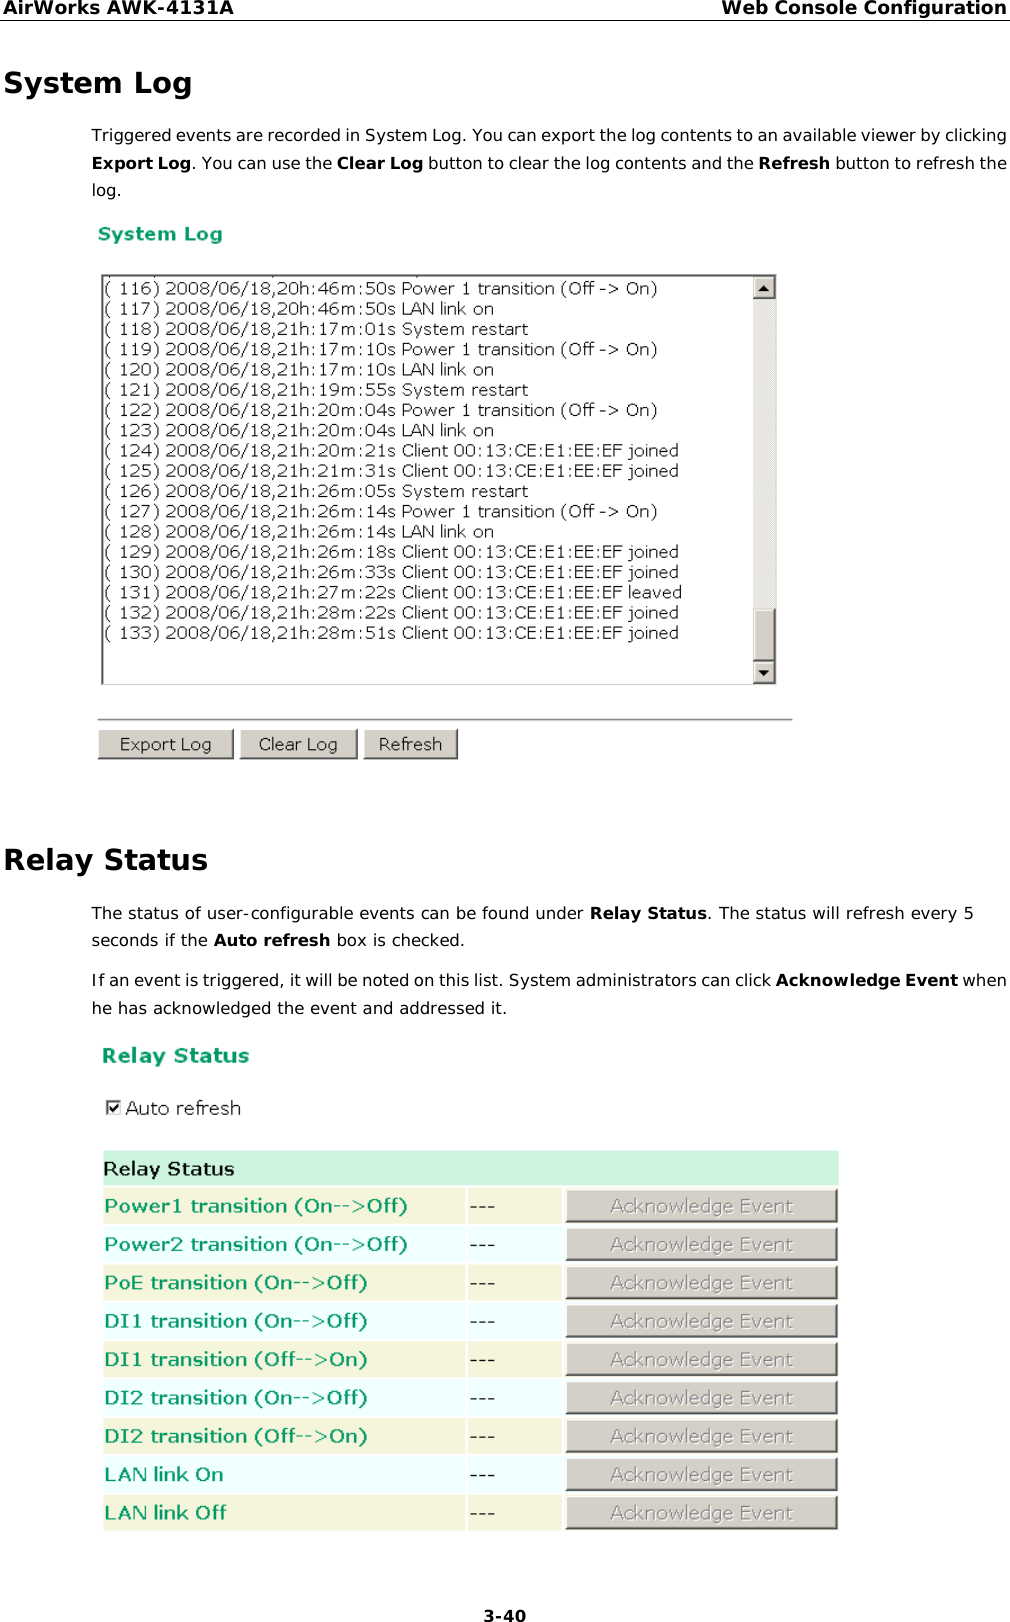 AirWorks AWK-4131A Web Console Configuration  3-40 System Log Triggered events are recorded in System Log. You can export the log contents to an available viewer by clicking Export Log. You can use the Clear Log button to clear the log contents and the Refresh button to refresh the log.   Relay Status The status of user-configurable events can be found under Relay Status. The status will refresh every 5 seconds if the Auto refresh box is checked.  If an event is triggered, it will be noted on this list. System administrators can click Acknowledge Event when he has acknowledged the event and addressed it.  